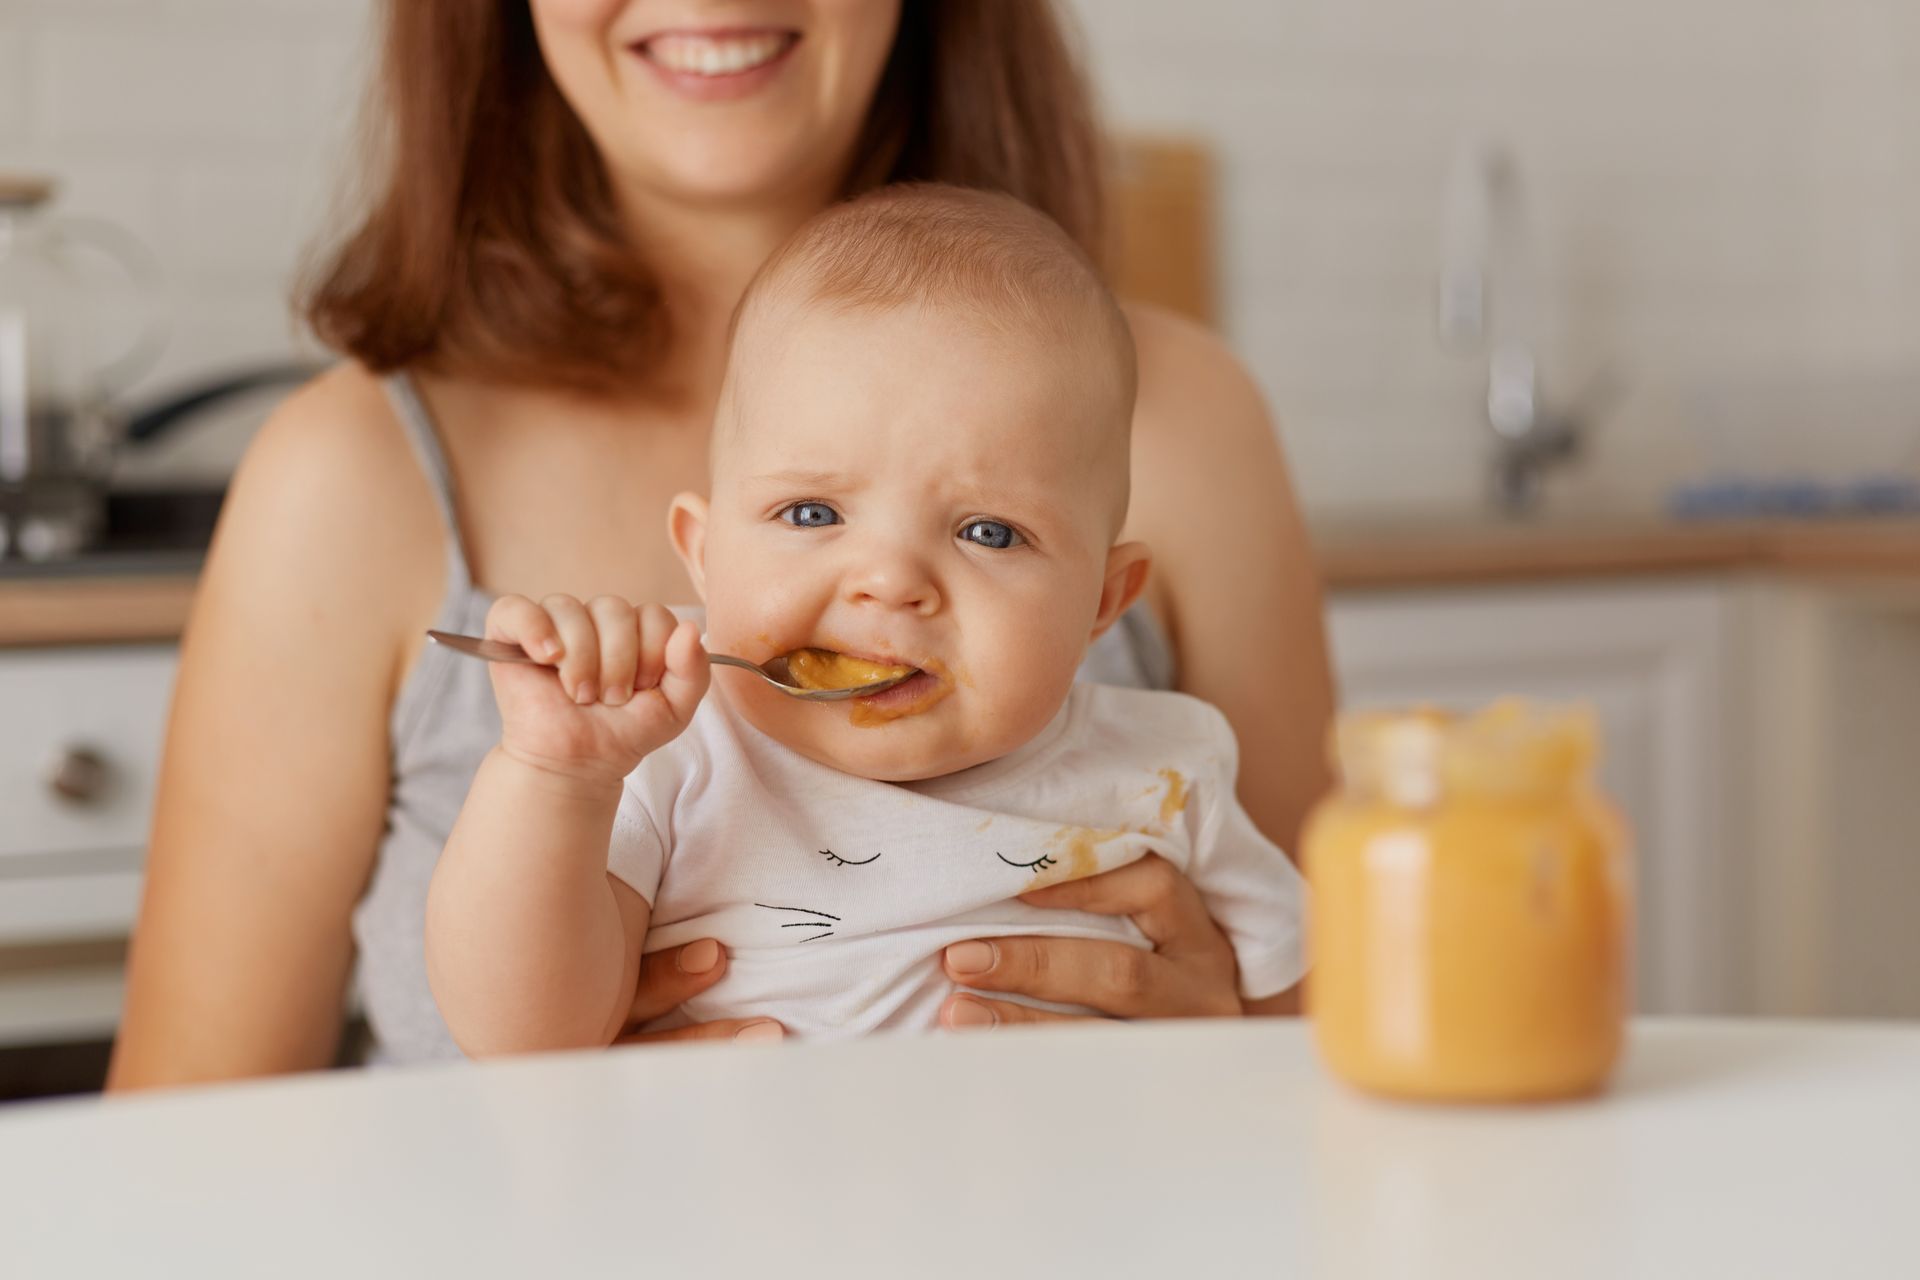 A woman is holding a baby who is eating food with a spoon.